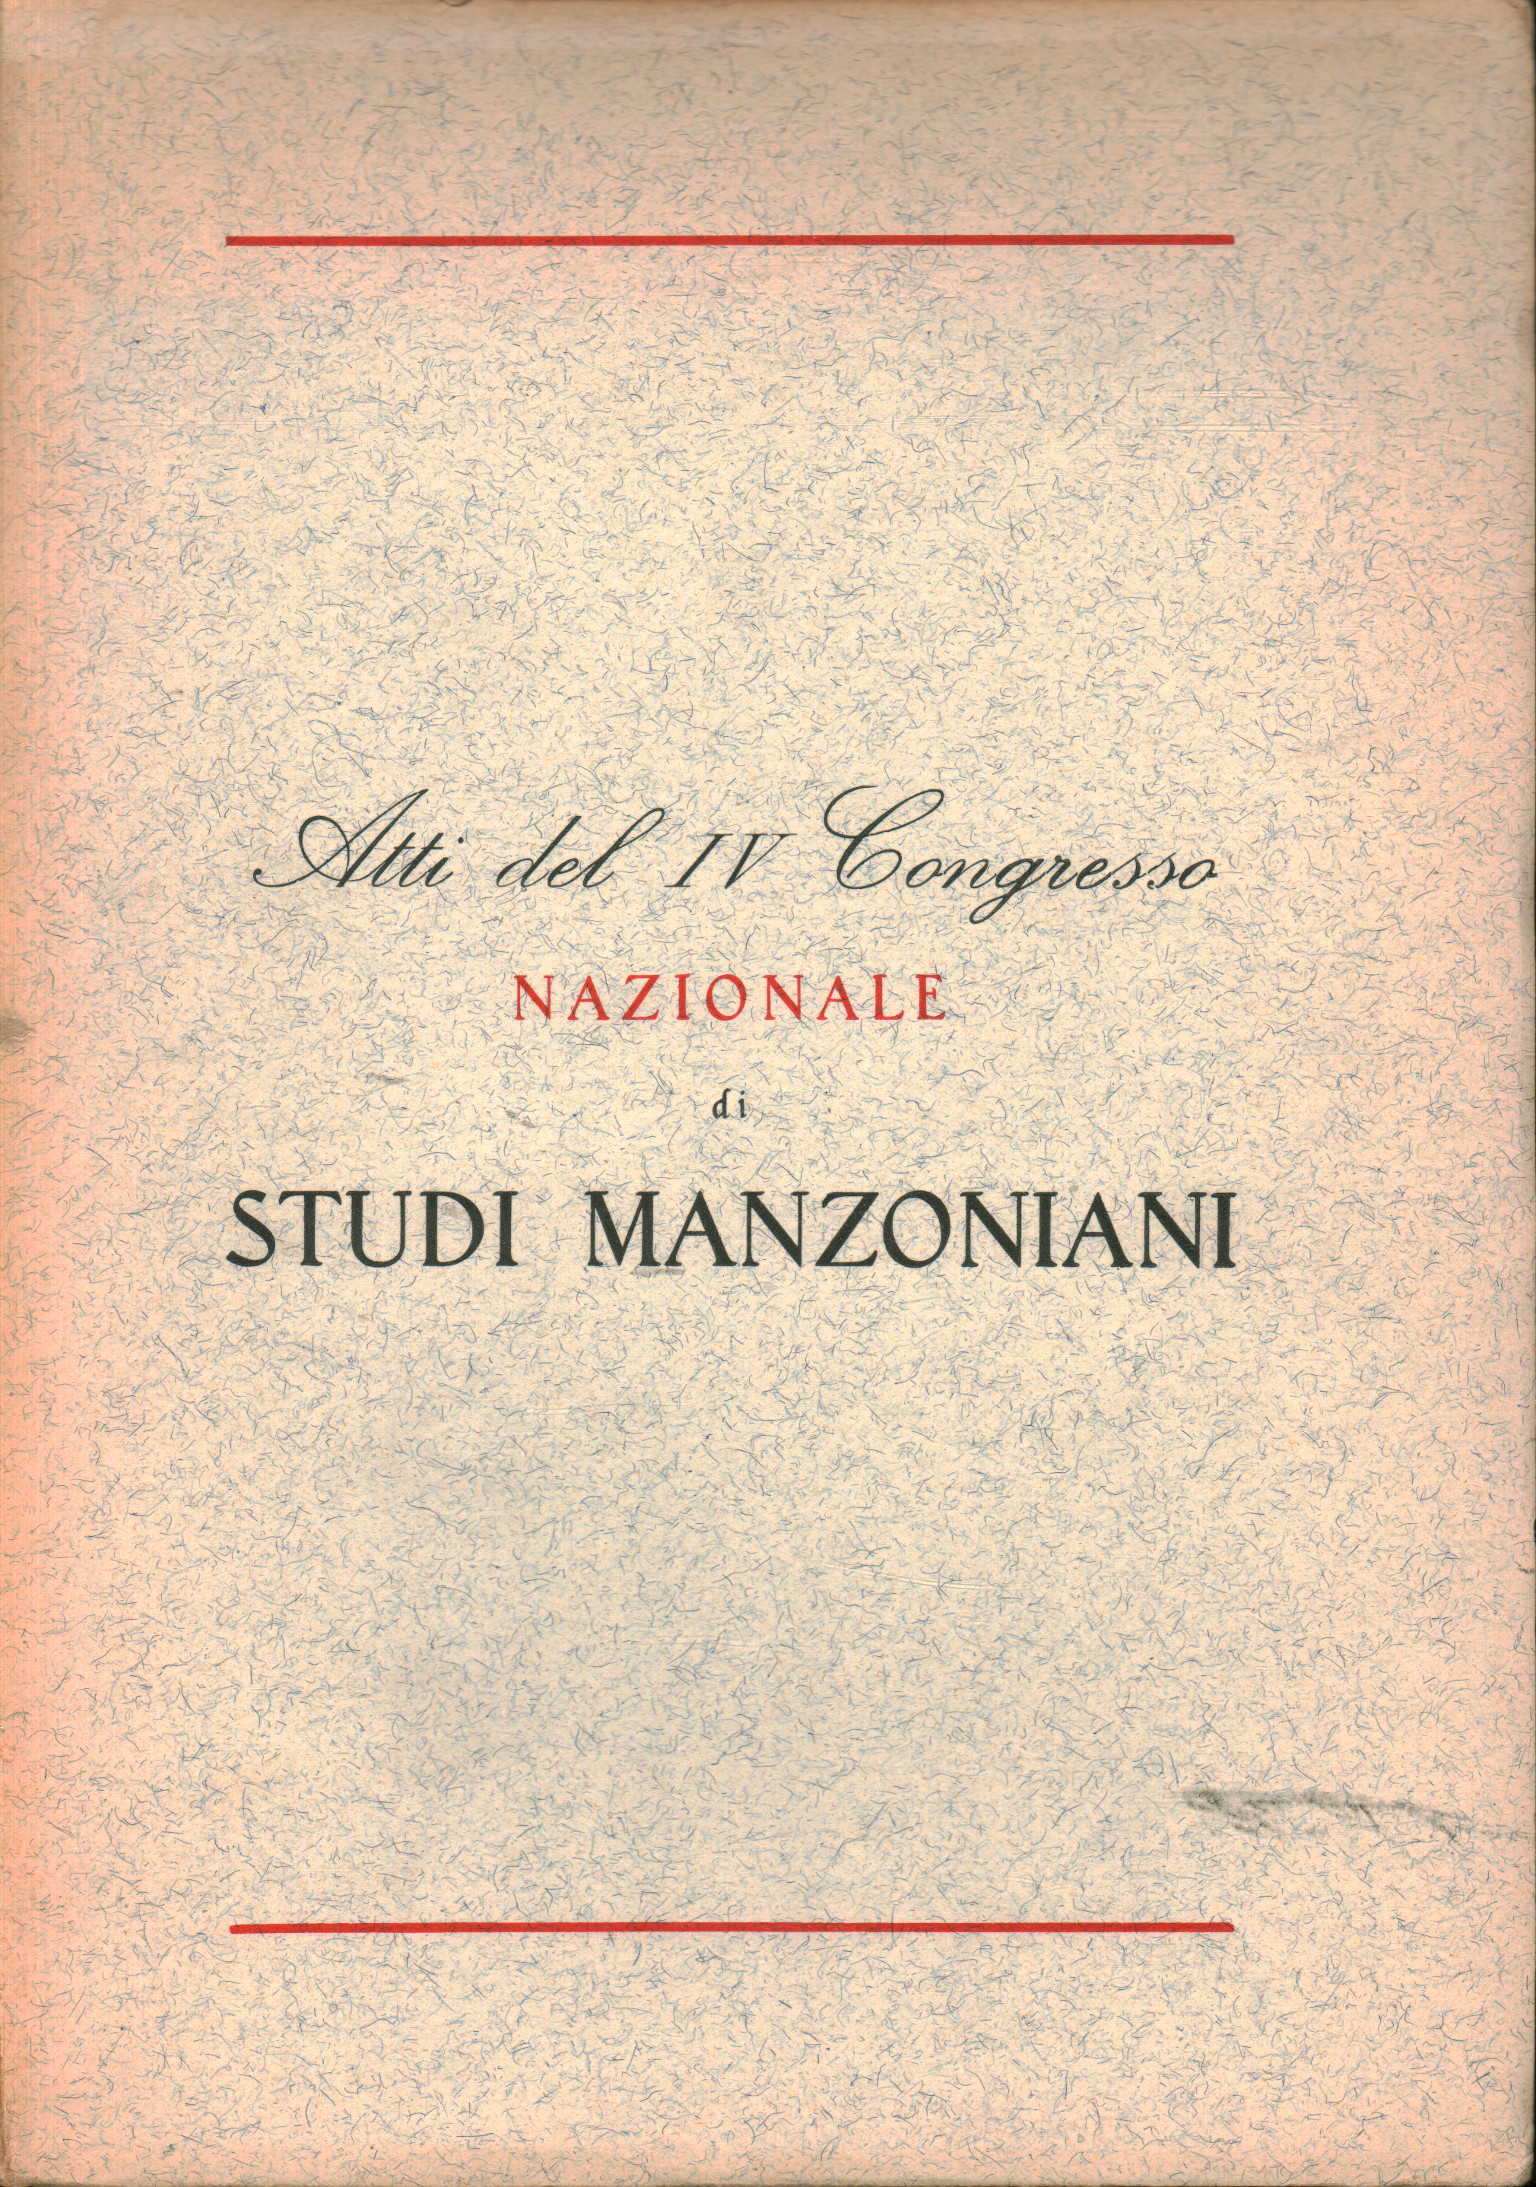 Proceedings of the IV National Congress of Studies Manzonian, AA.VV